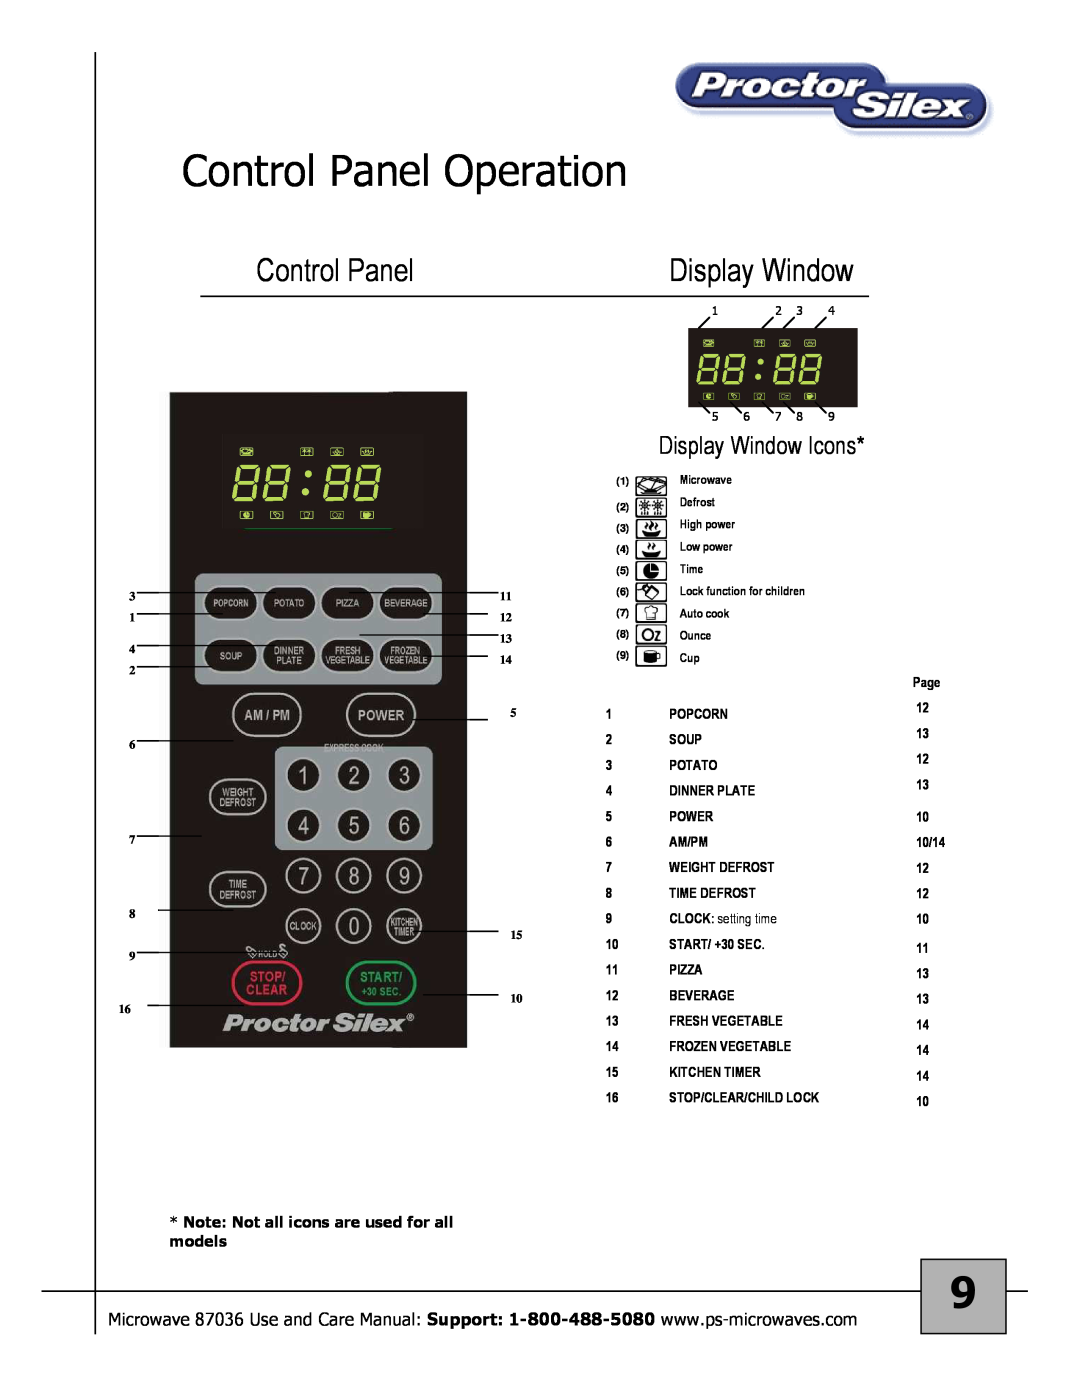 Proctor-Silex 87036 Control Panel Operation, Display Window Icons, Note Not all icons are used for all models 